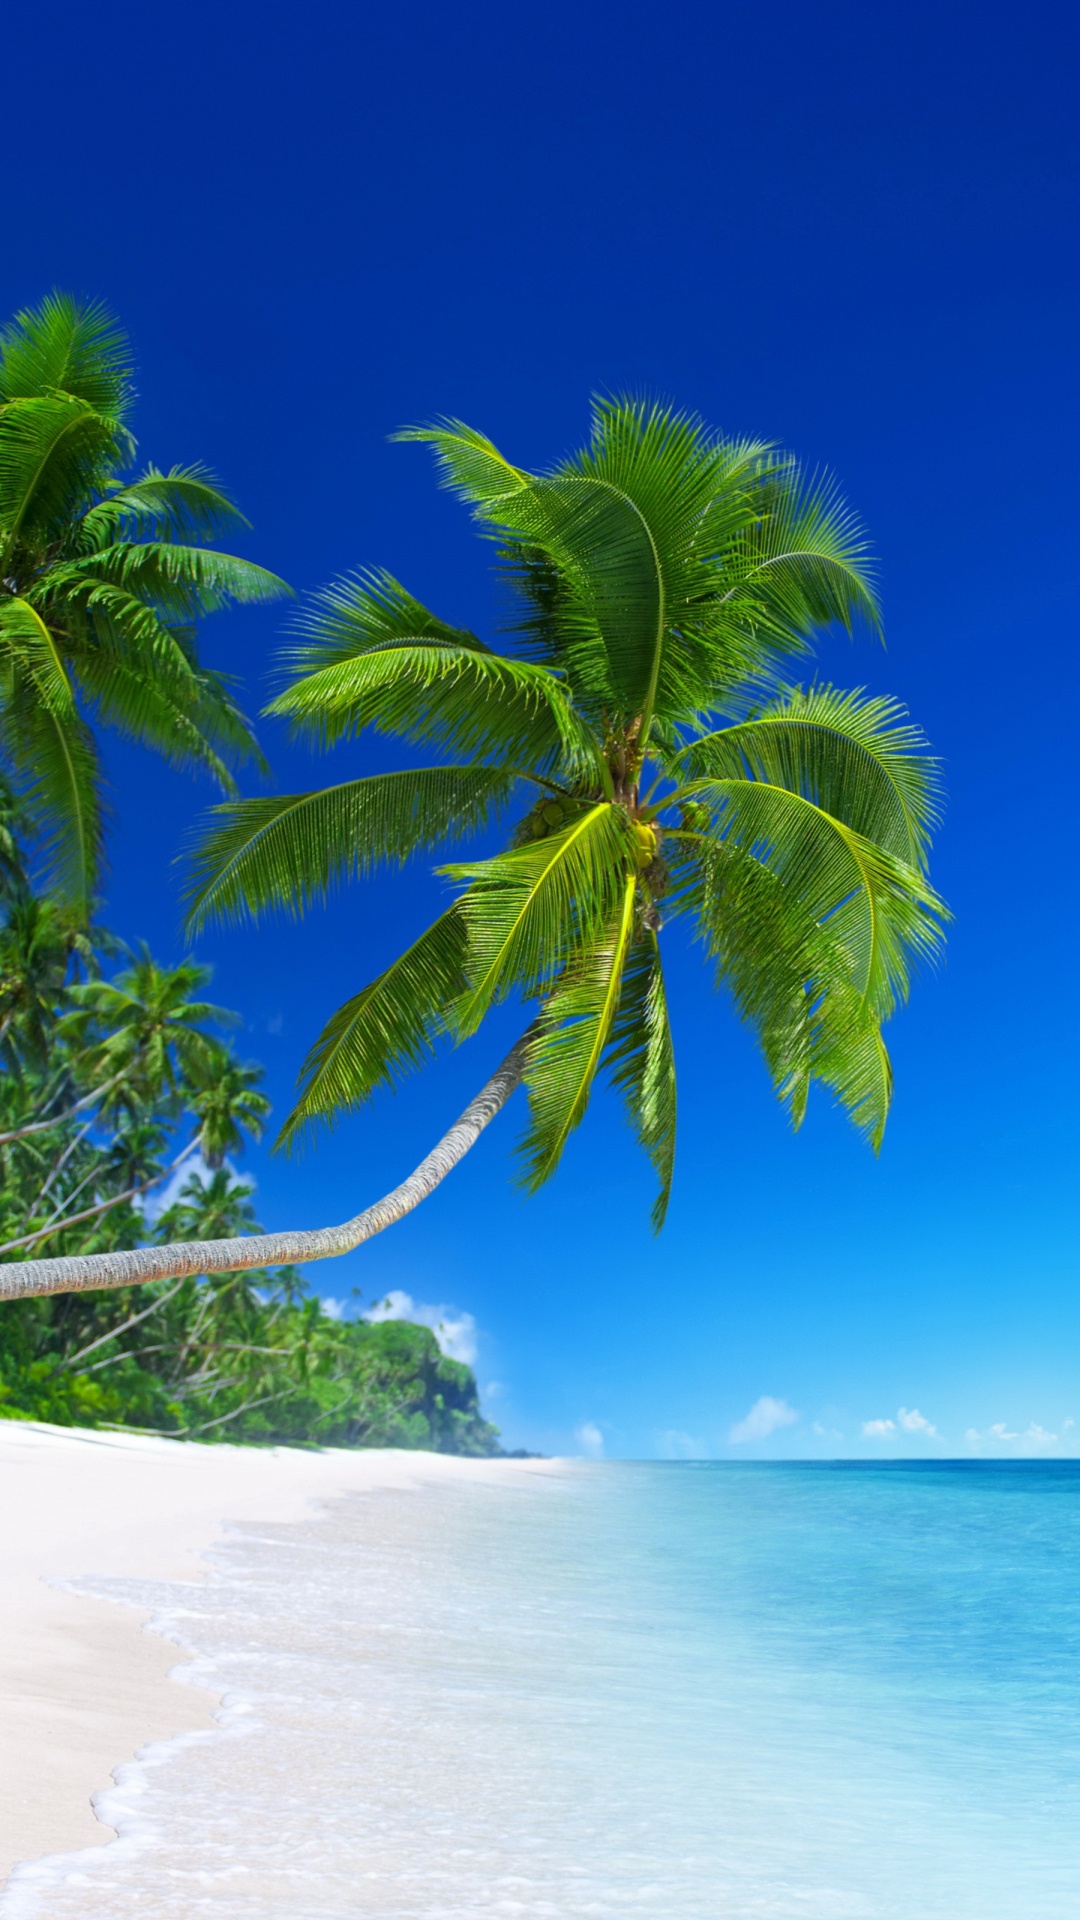 Green Palm Tree on White Sand Beach During Daytime. Wallpaper in 1080x1920 Resolution